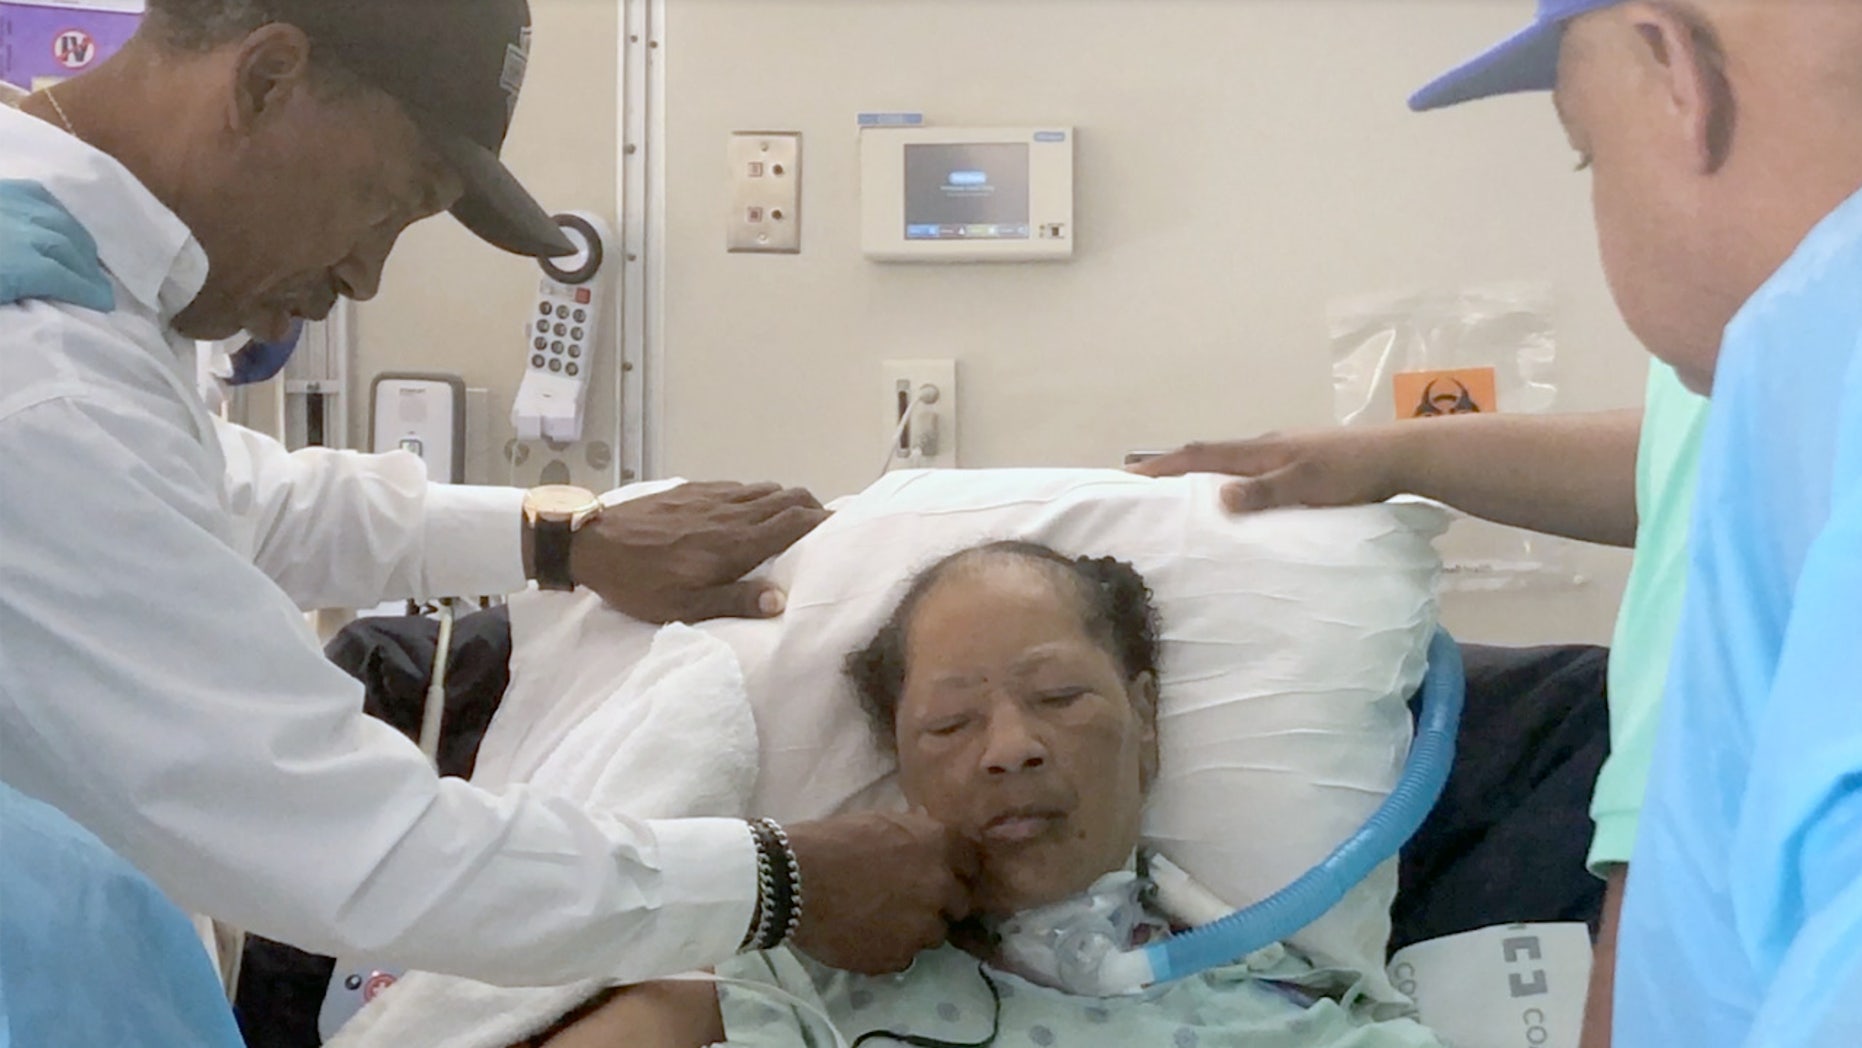 Carolyn Jones, 61, fights for her life after a Houston hospital pulled the plug against her family's wishes. Her husband of 40 years, Donald, is on her left.